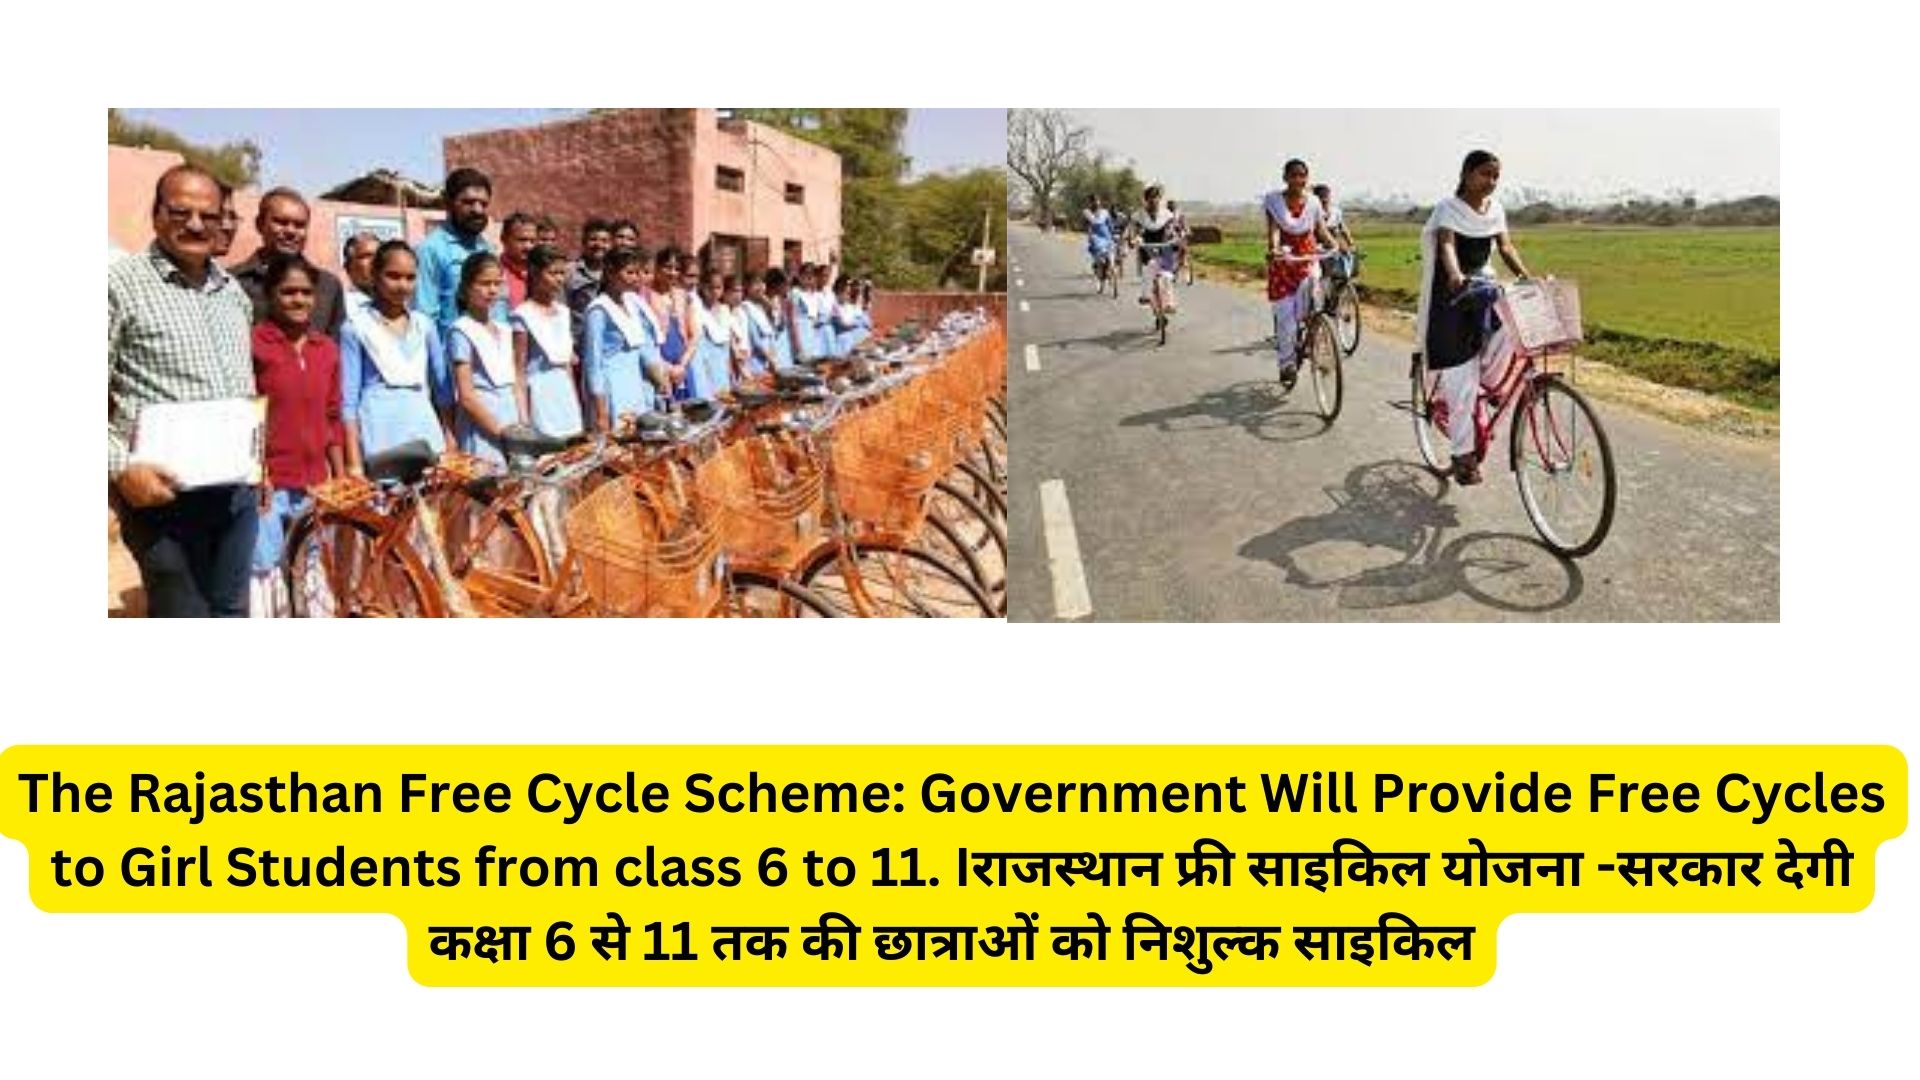 The Rajasthan Free Cycle Scheme: Government Will Provide Free Cycles to Girl Students from class 6 to 11. Iराजस्थान फ्री साइकिल योजना -सरकार देगी कक्षा 6 से 11 तक की छात्राओं को निशुल्क साइकिल